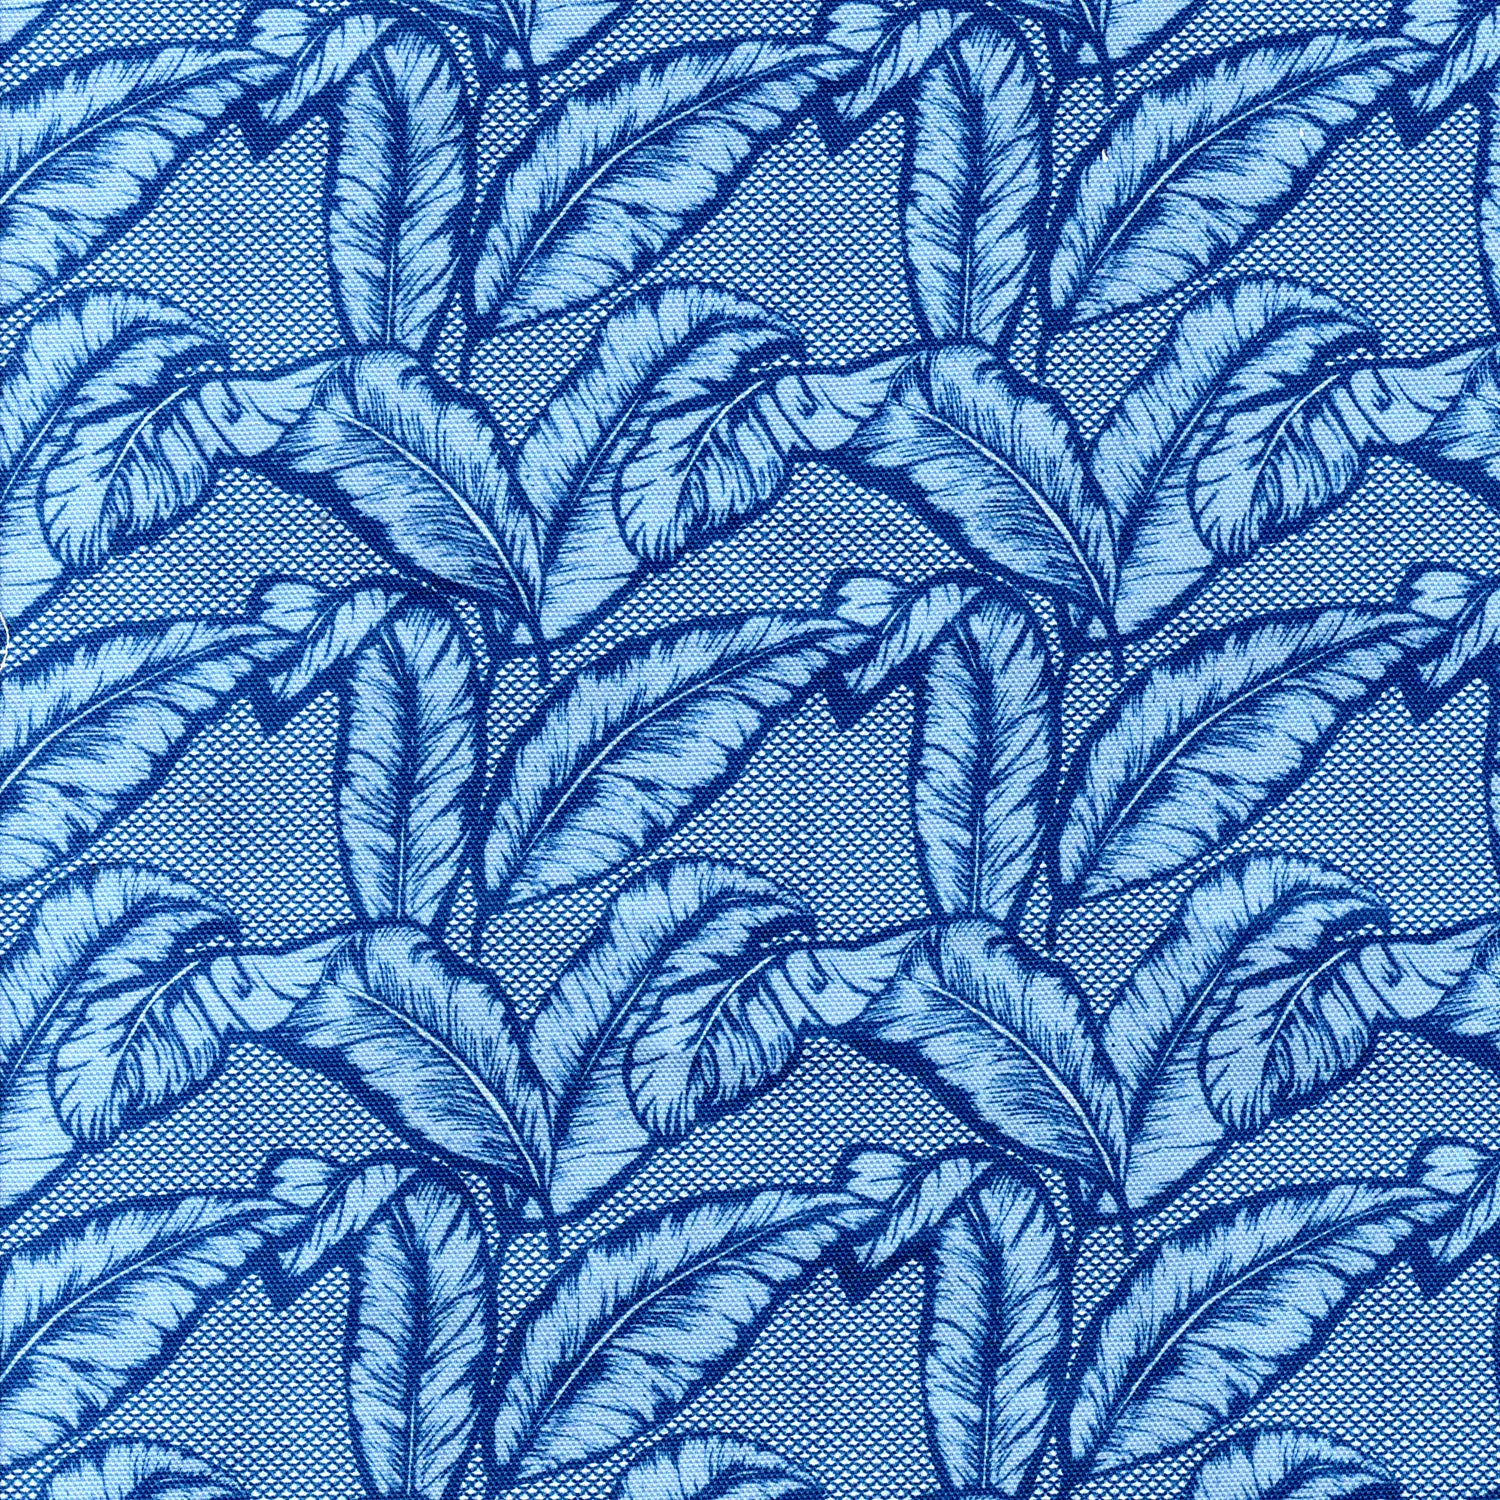 Detail of fabric in a dense leaf print in navy and blue on a blue field.